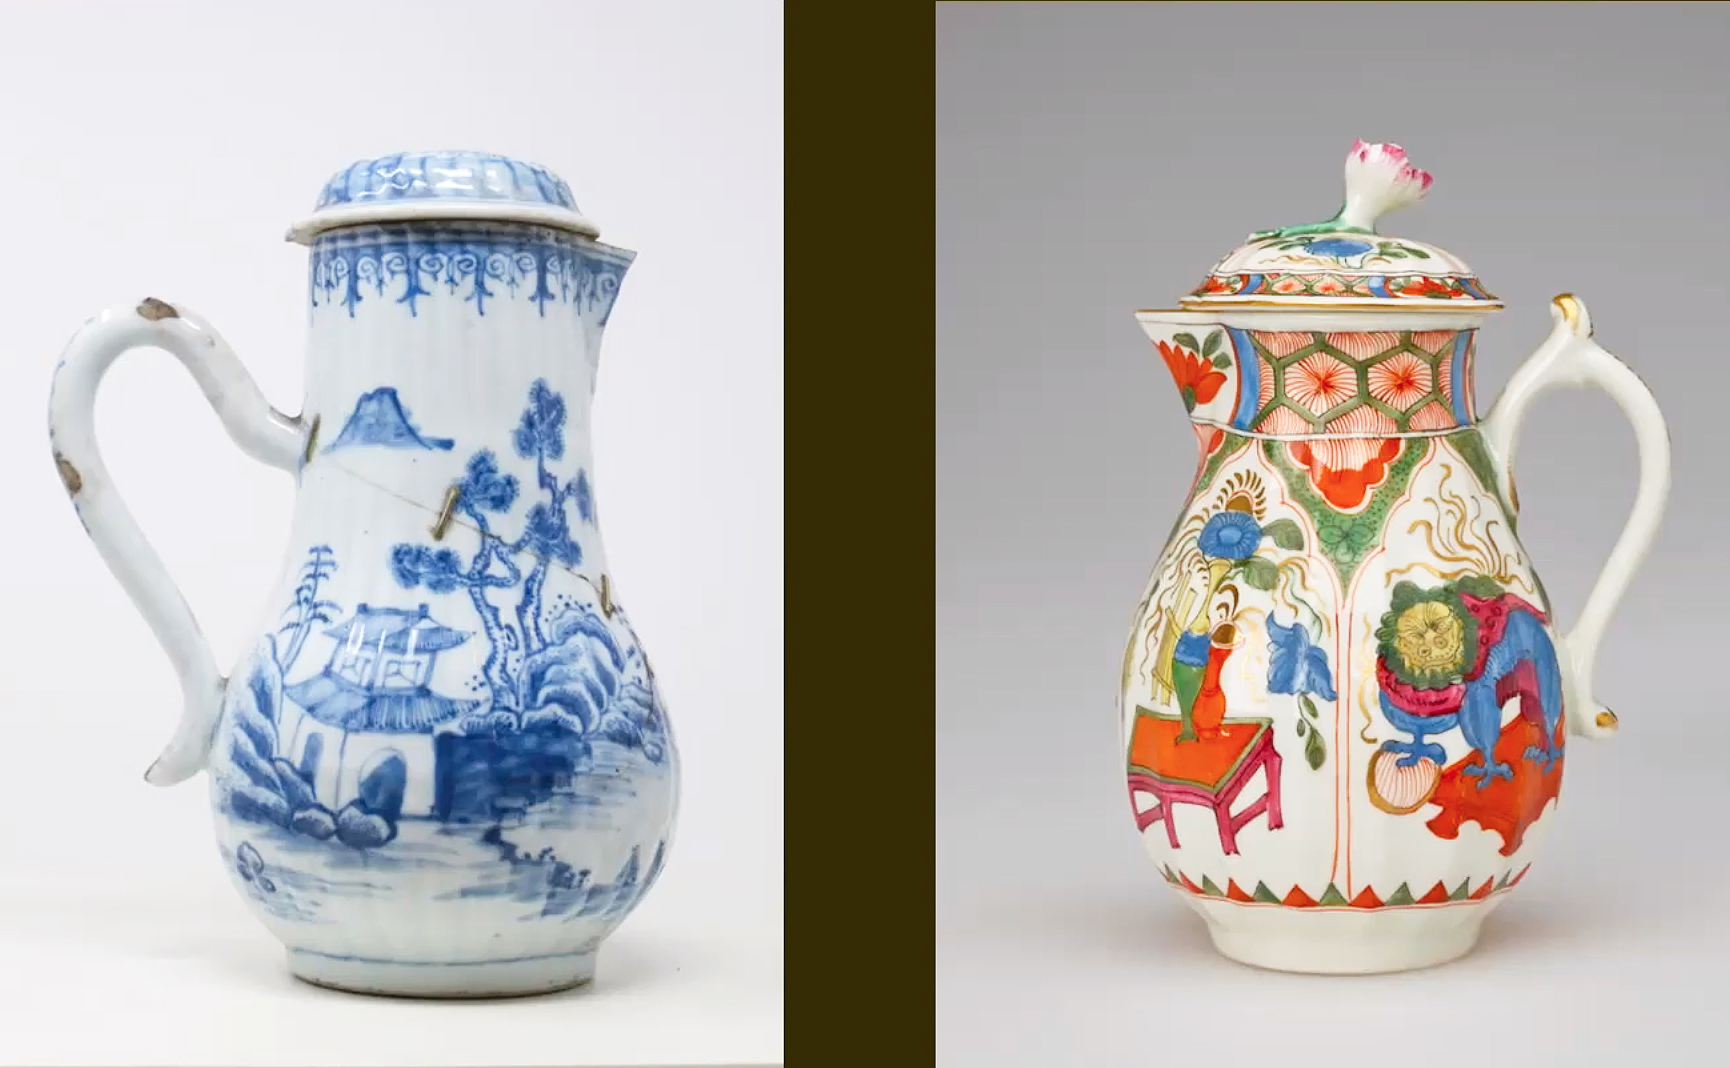 two ceramic vessels from the collection of the RISD Museum